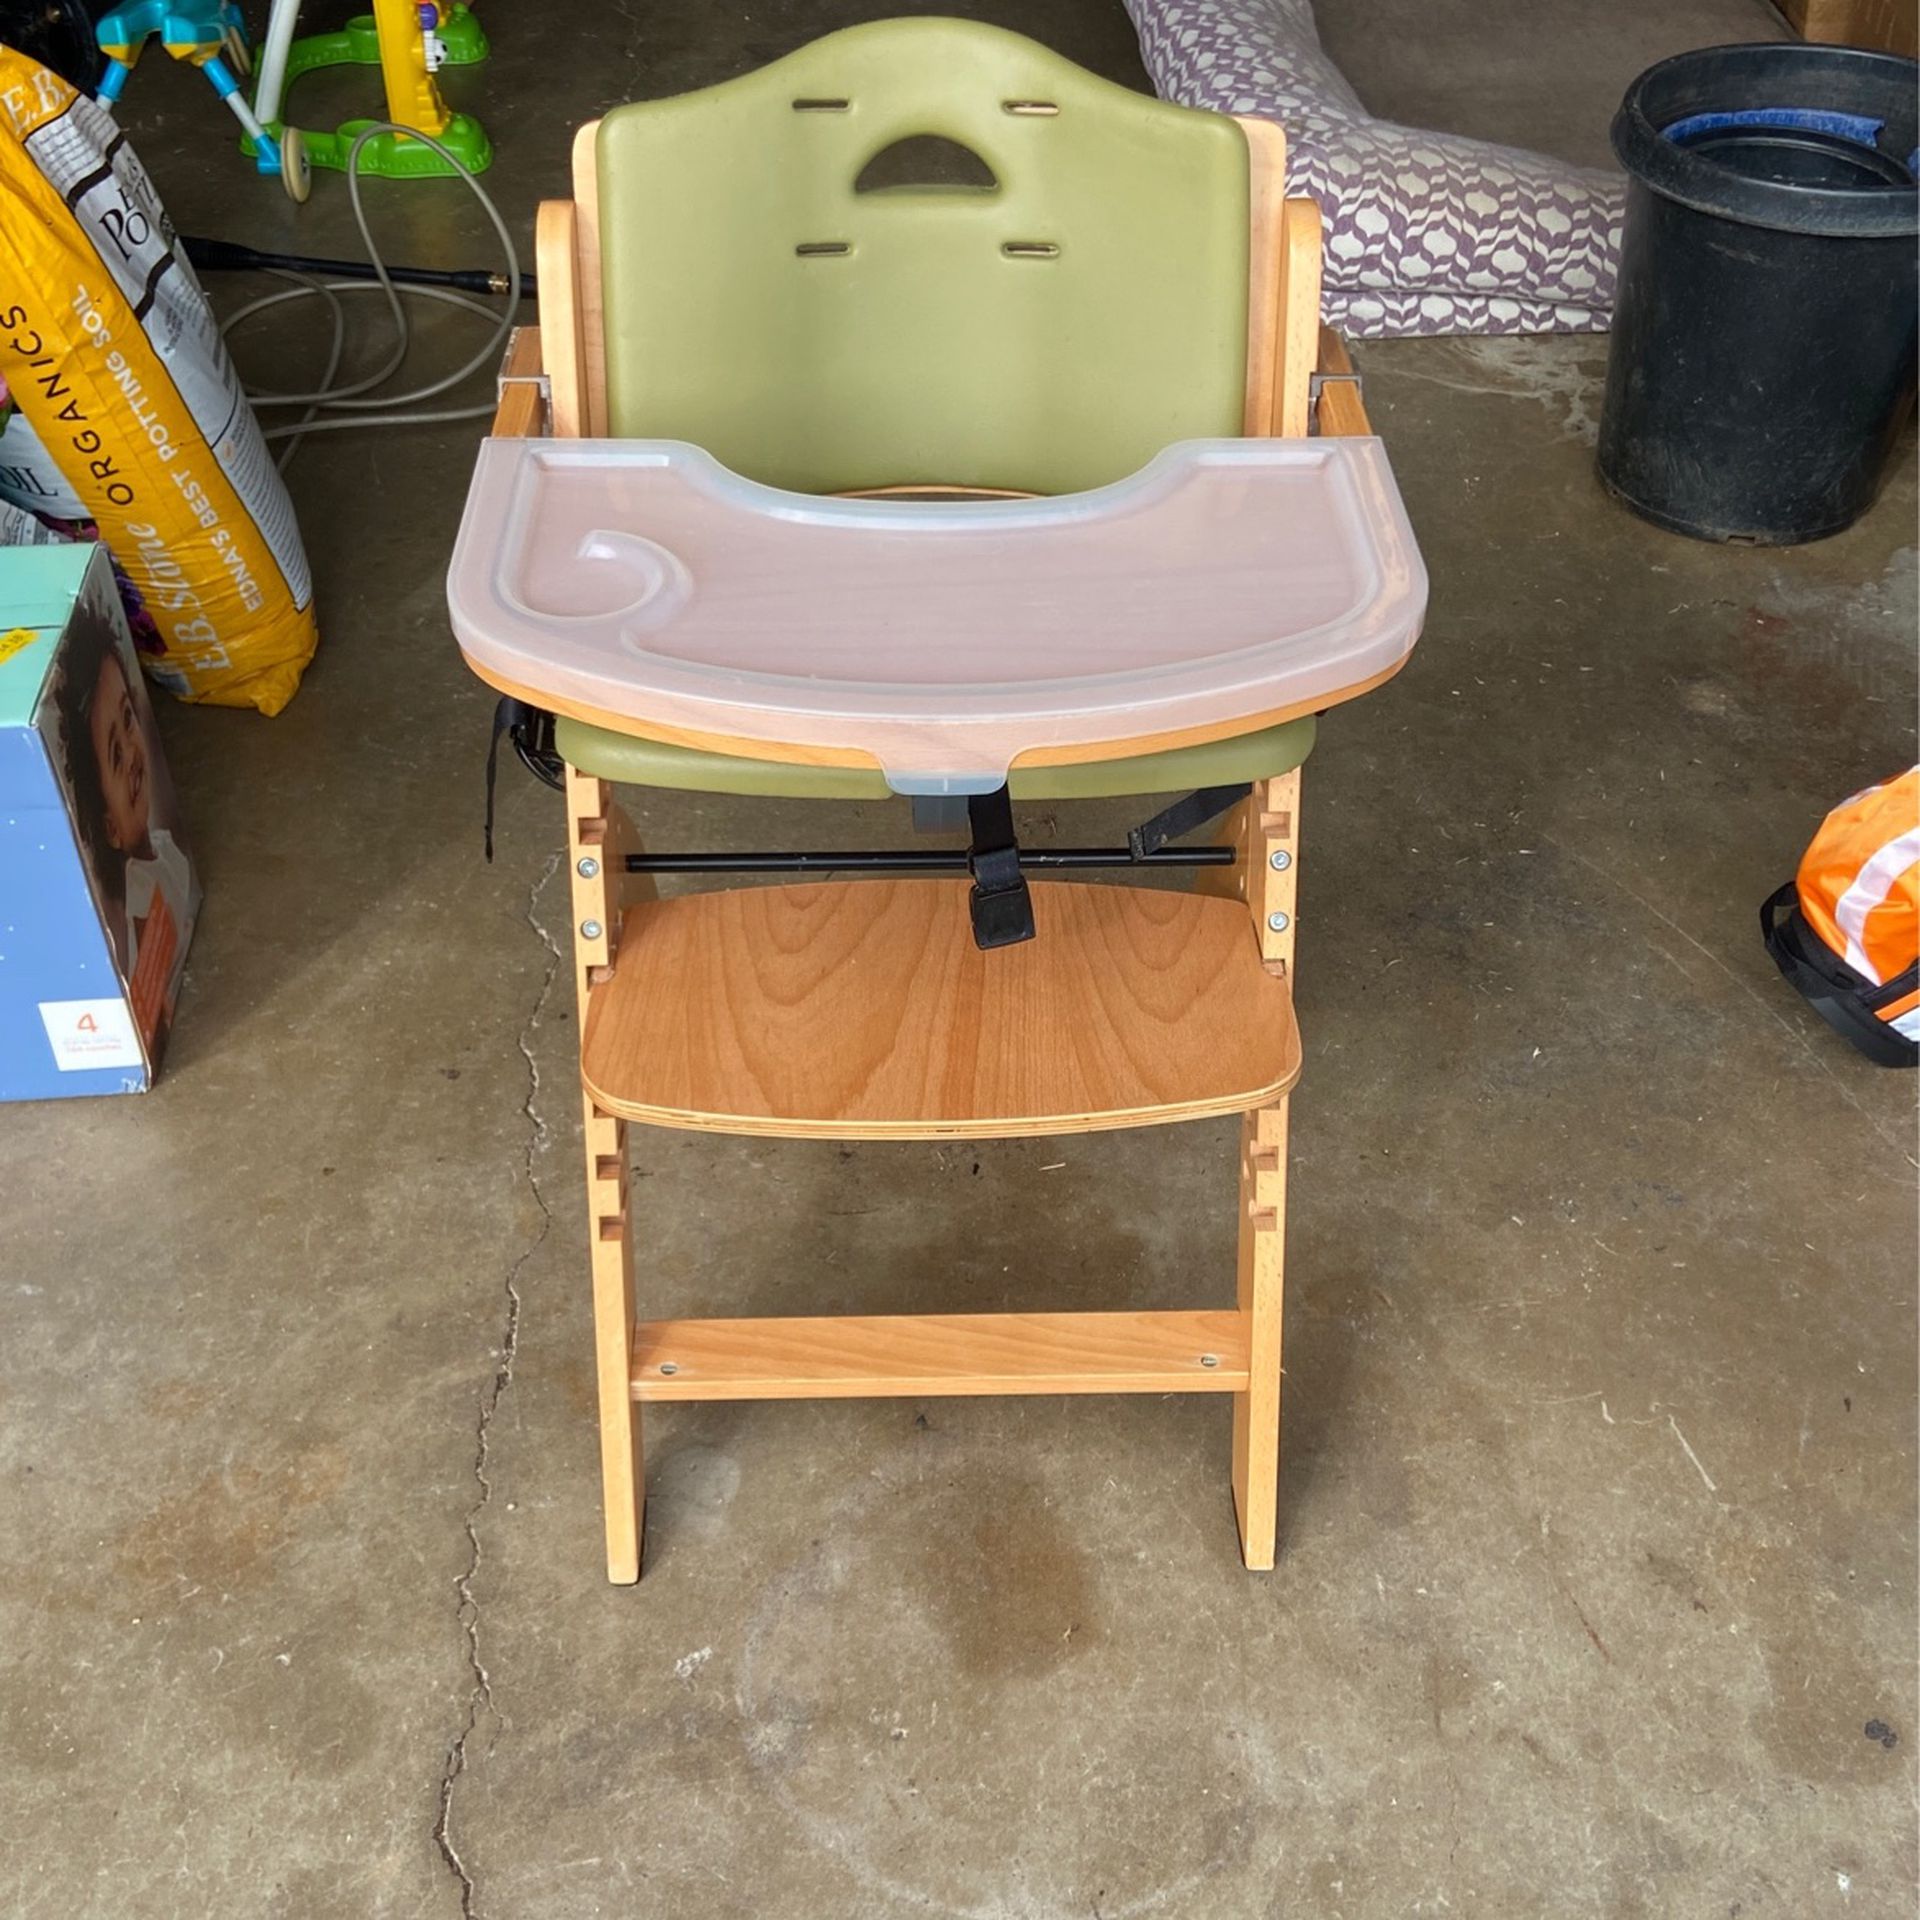 Abiie Beyond Y Wooden High Chair